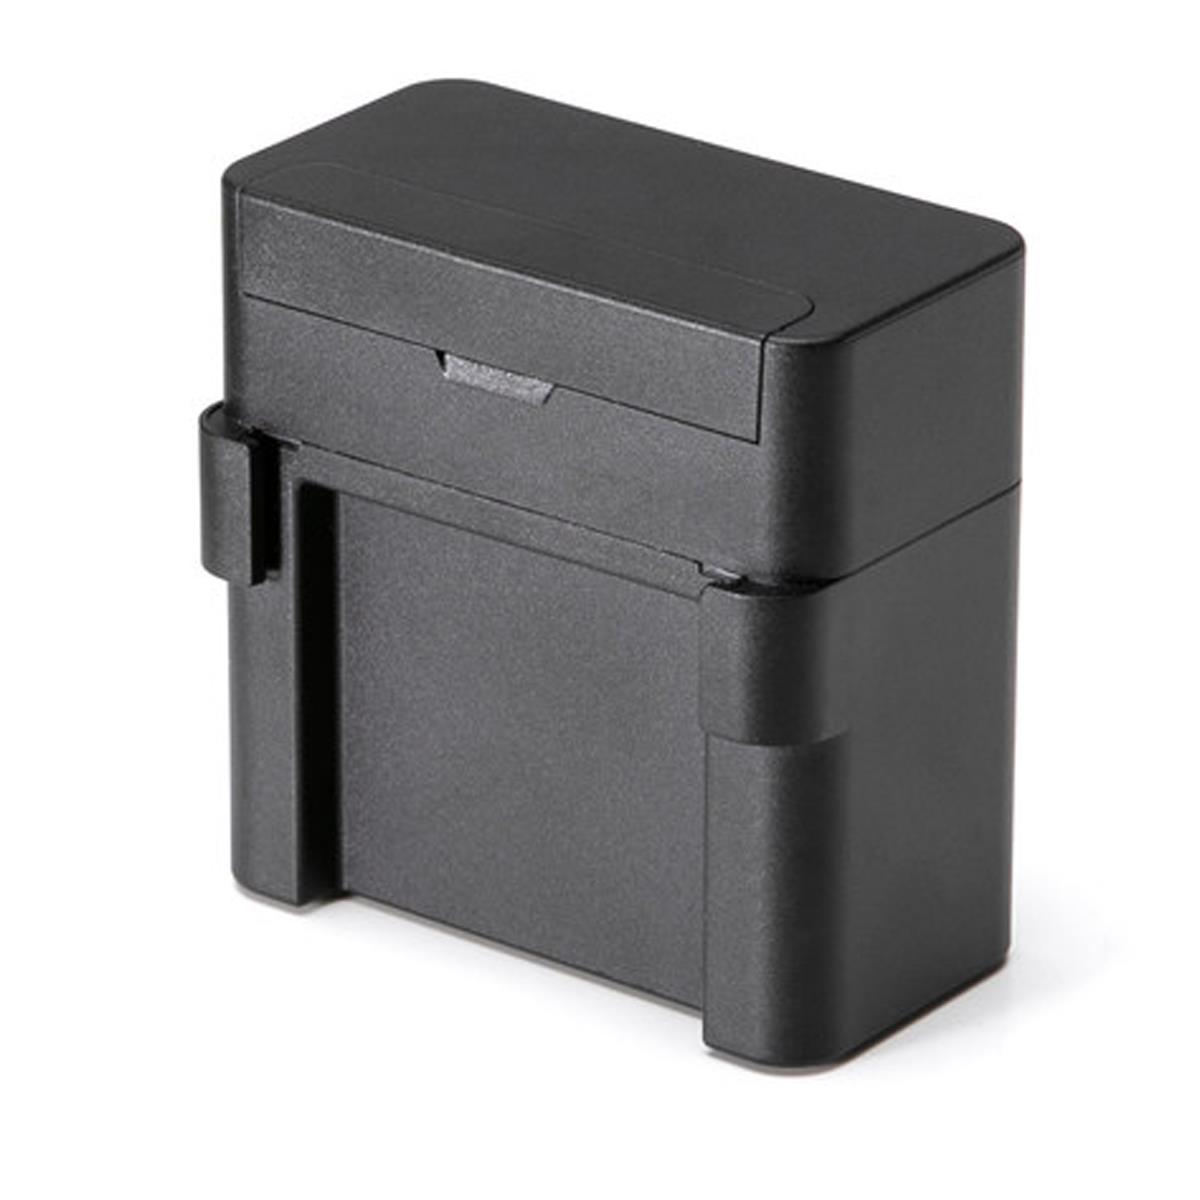 Image of DJI EDU DJI Part 4 Charger for RoboMaster S1 Intelligent Battery